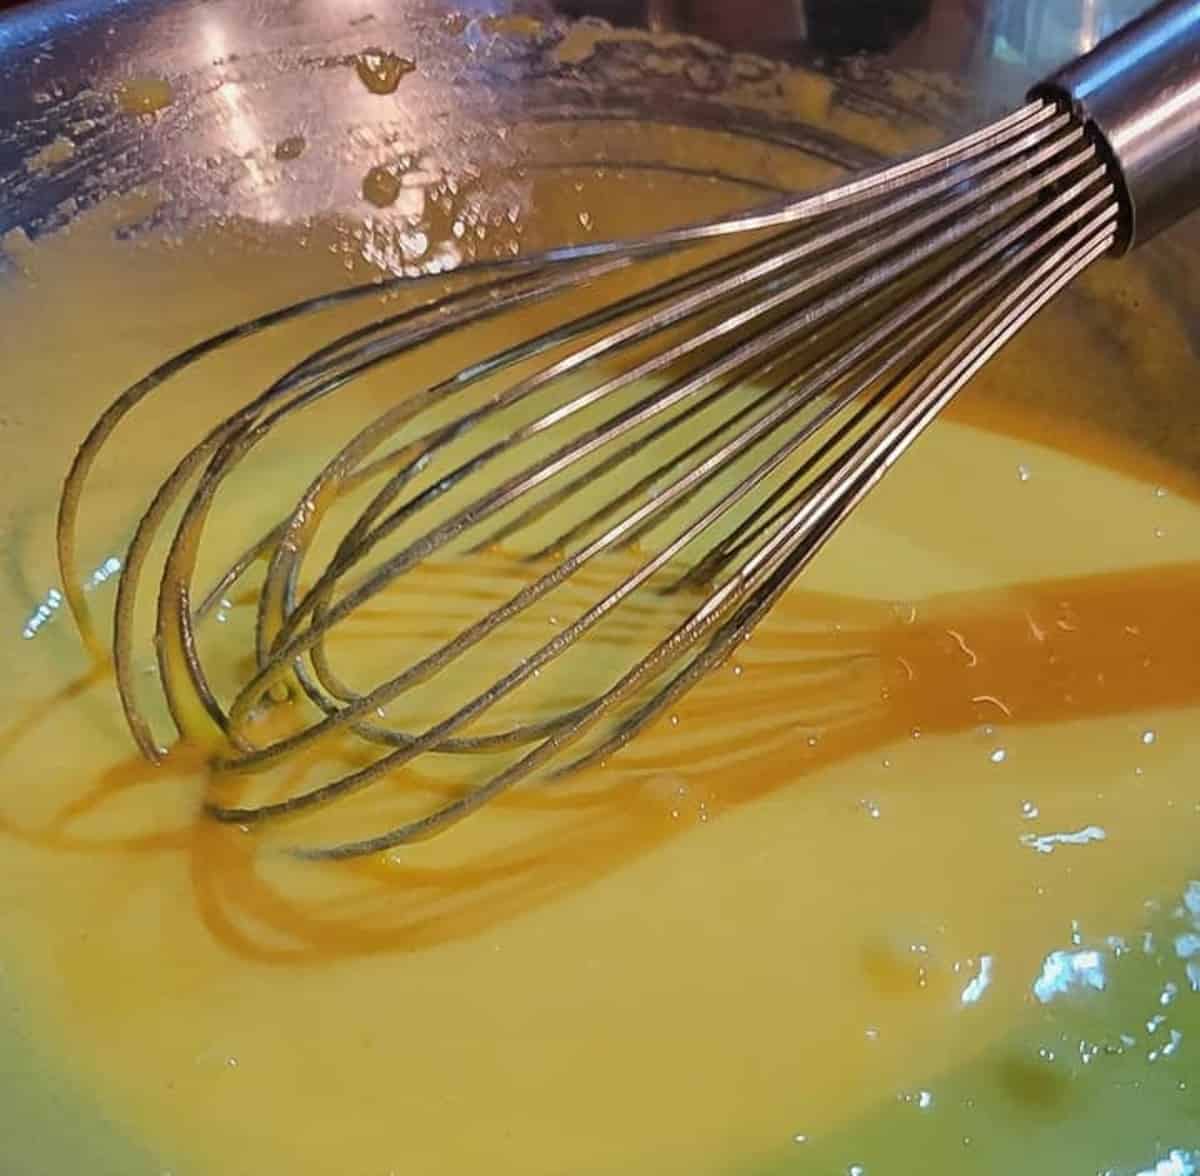 egg yolk and sugar mixture in mixing bowl with wire whip
flourless chocolate torte